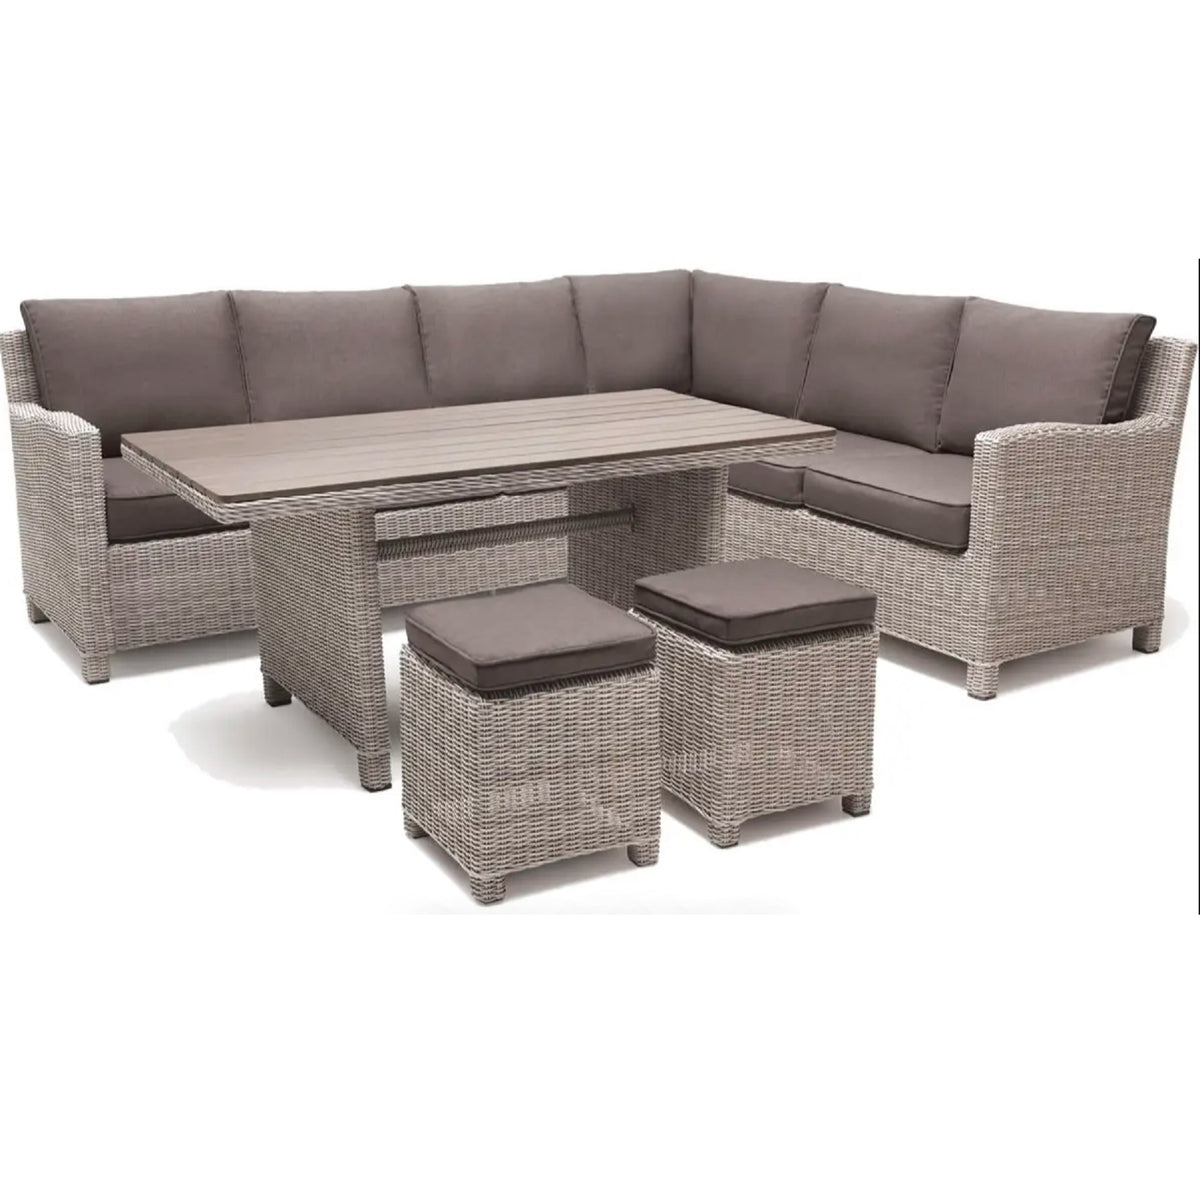 Kettler Palma Corner Left Hand White Wash Wicker Outdoor Sofa Set with Slat Top Table